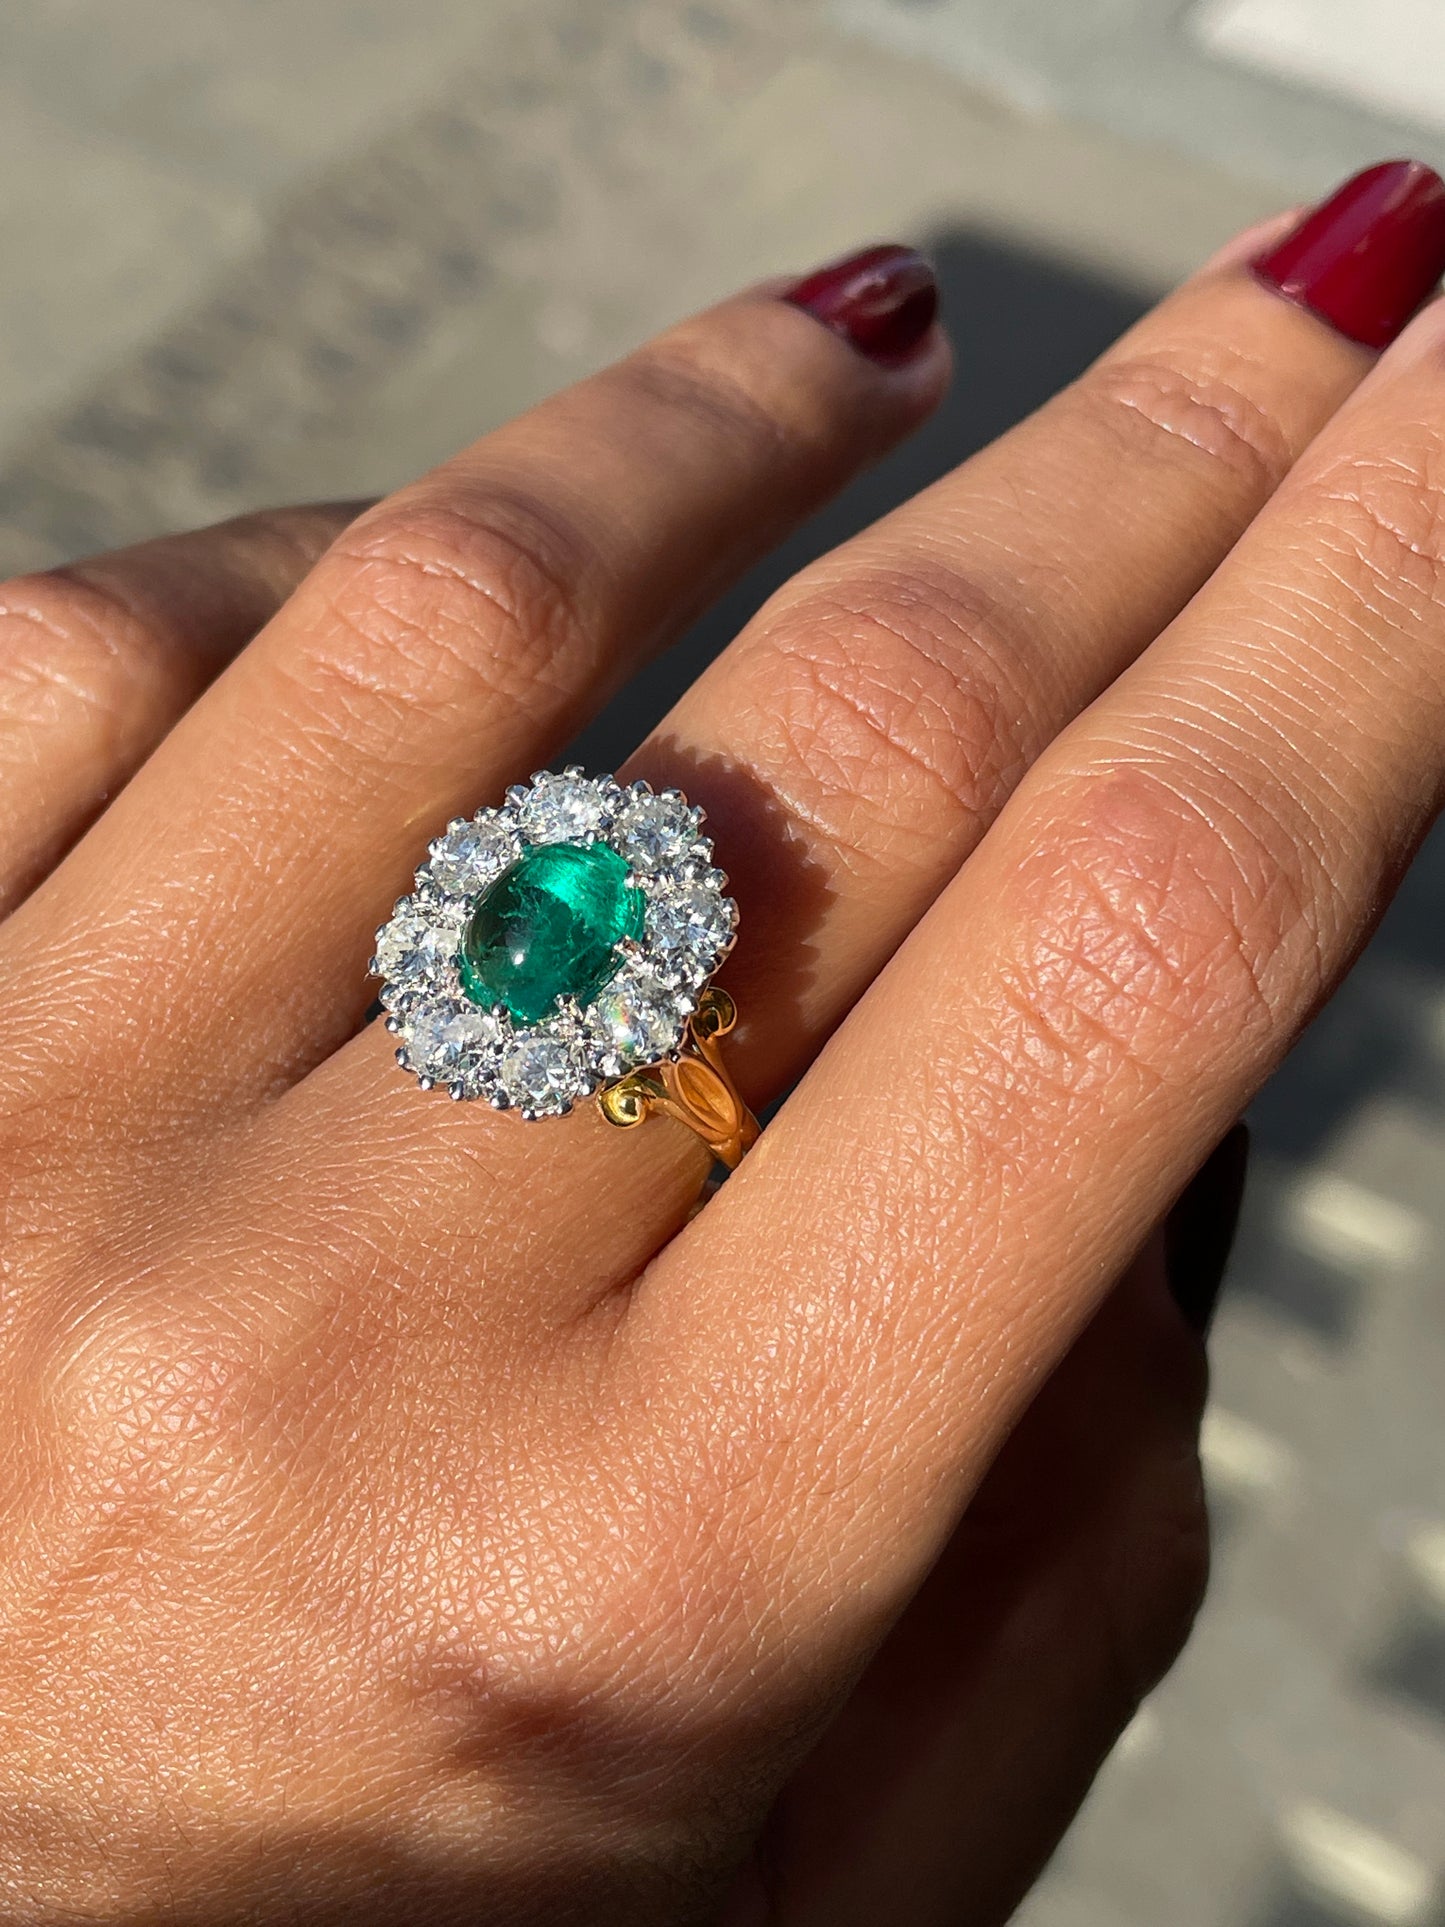 Vintage Cabochon Emerald and Diamond Cluster 18 Carat Gold Engagement Ring, 1974